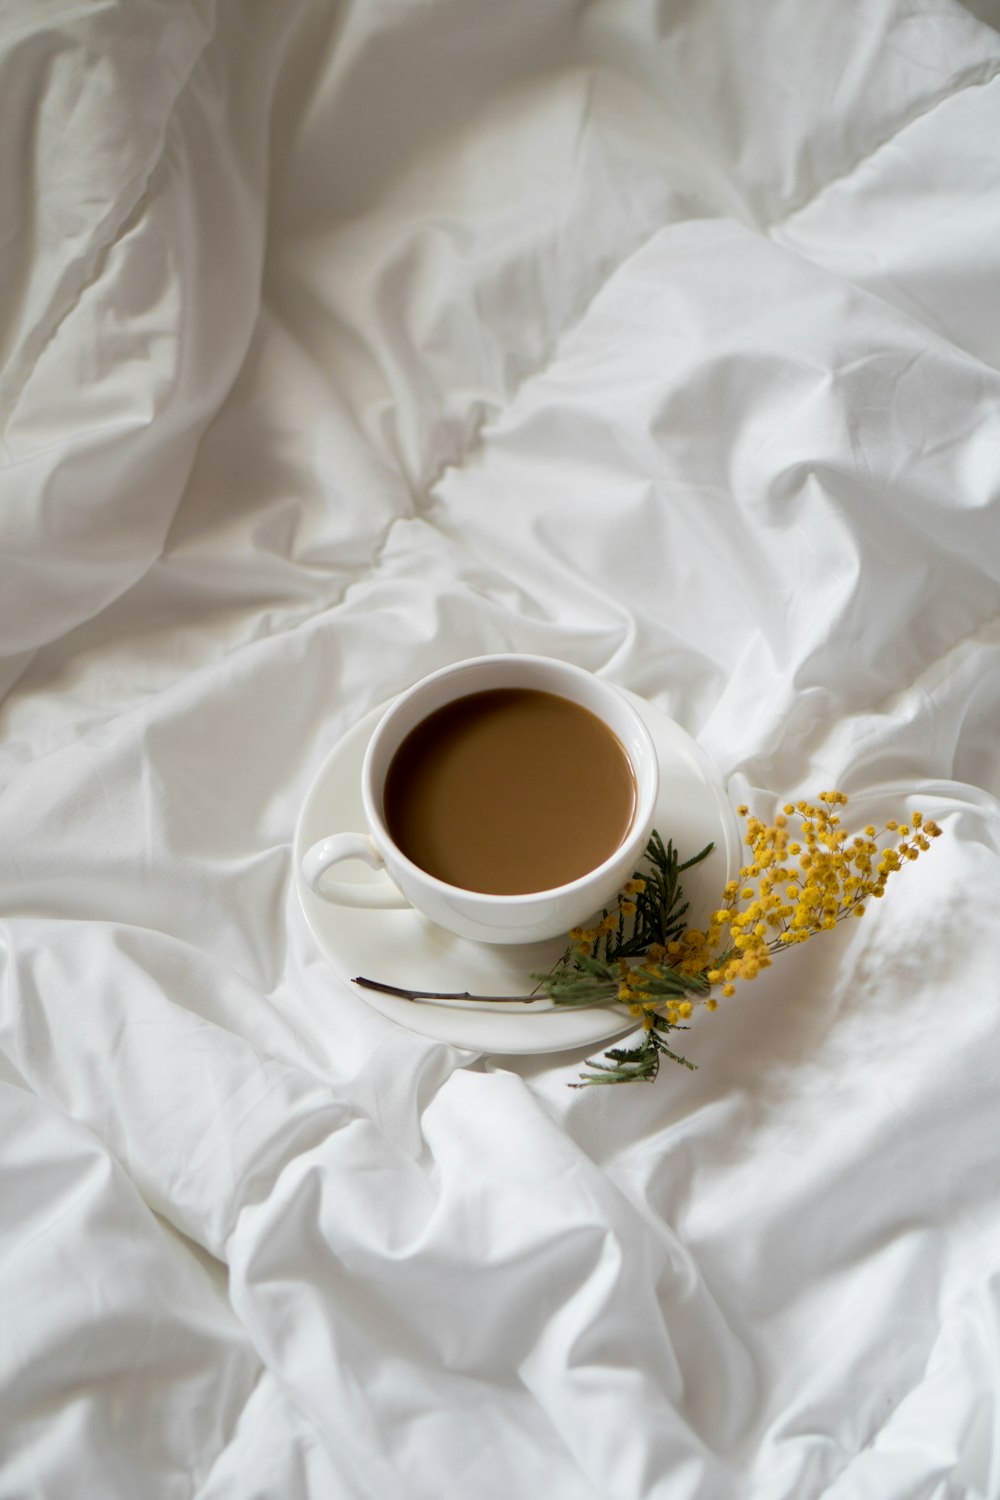 a cup of coffee on a saucer with a sprig of yellow flowers